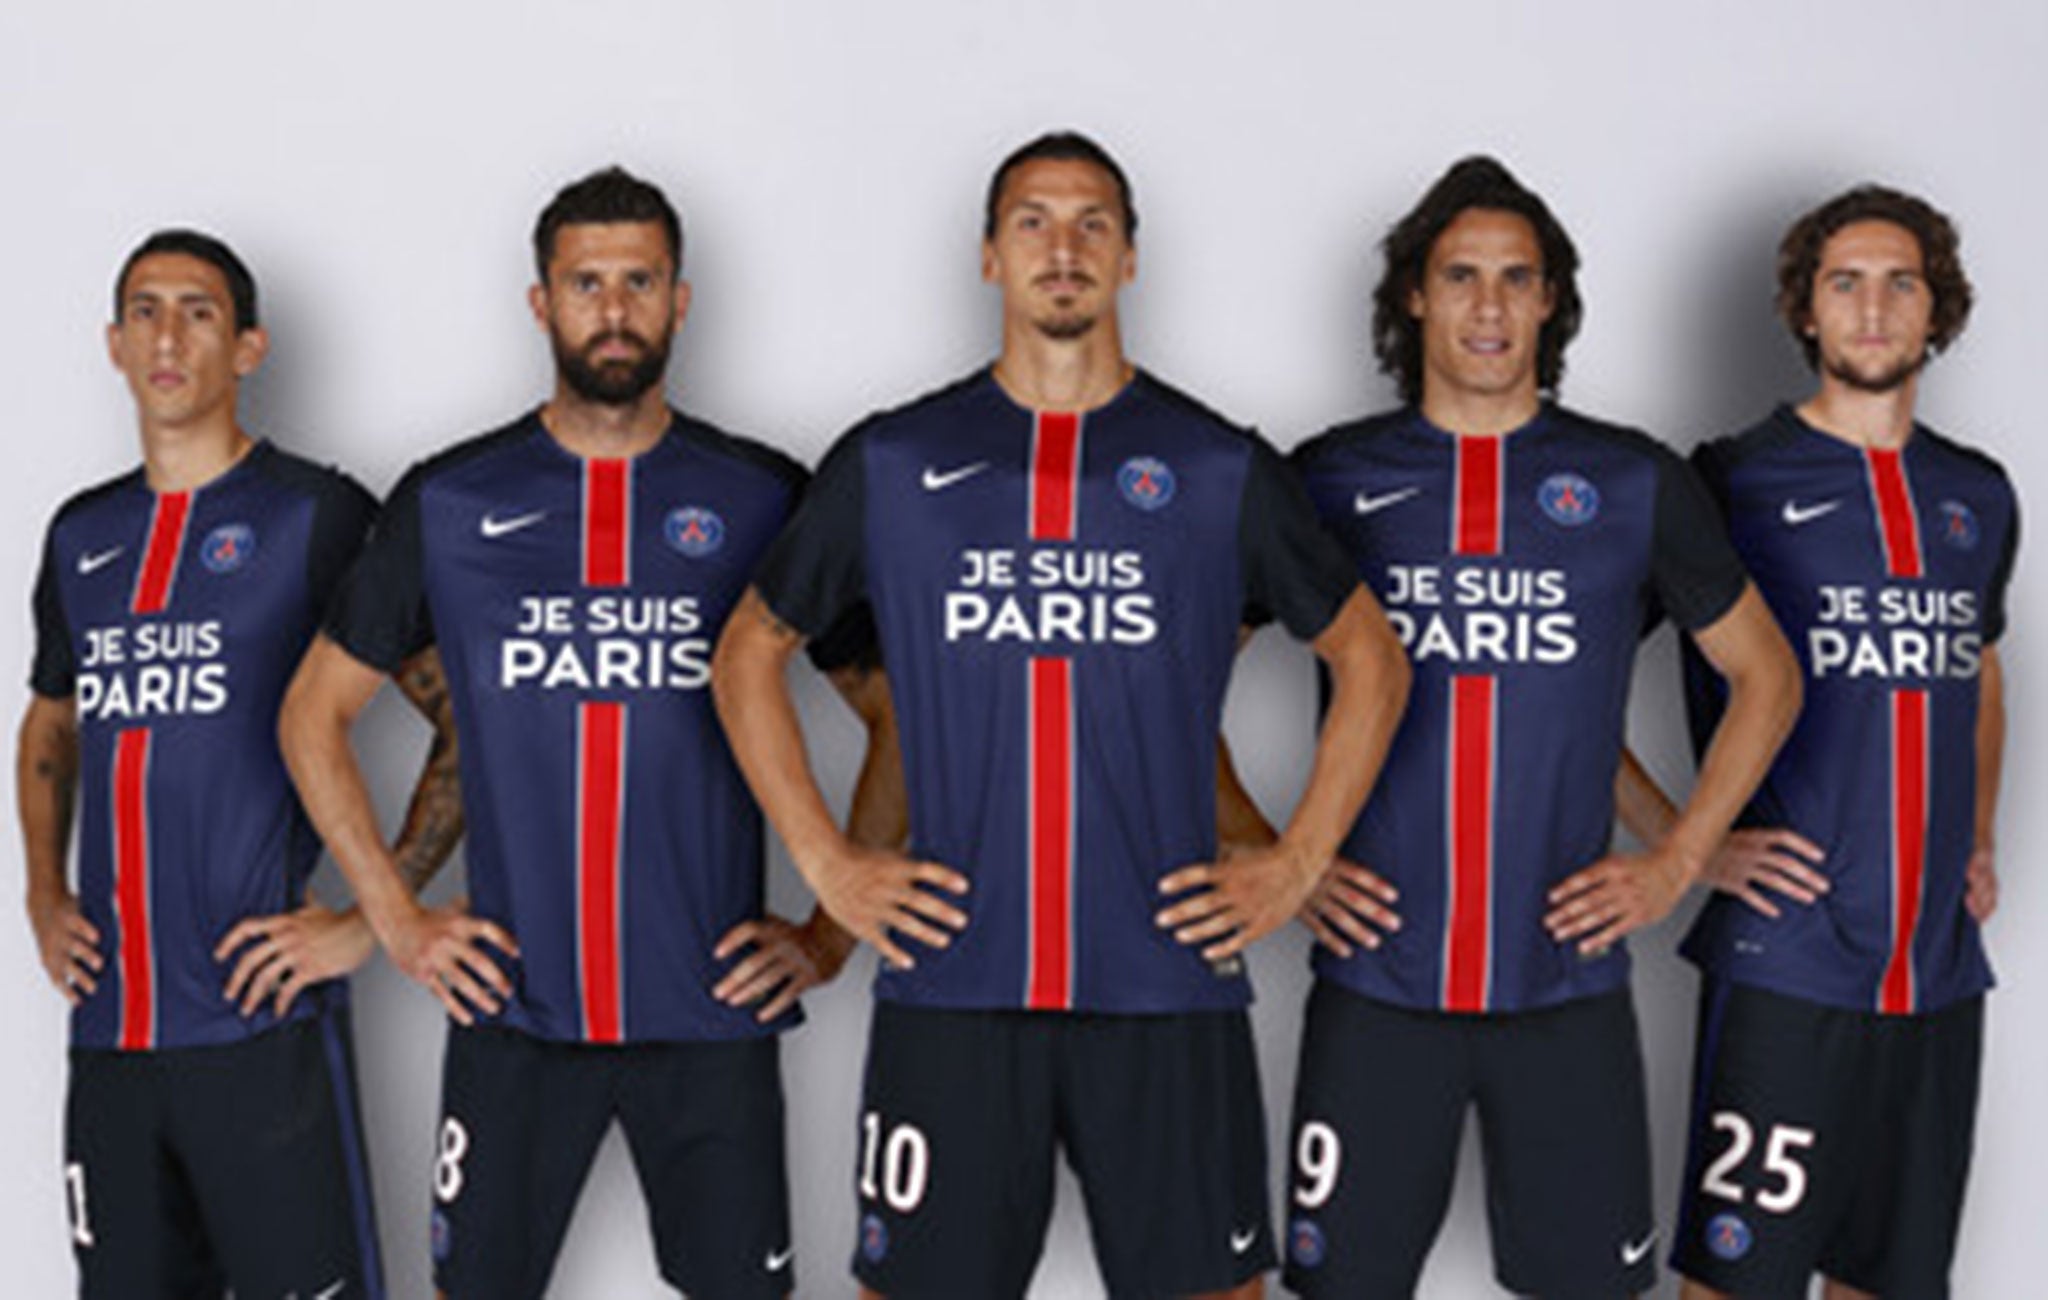 Paris Saint-Germain players will wear special shirts to honour the Paris attack victims